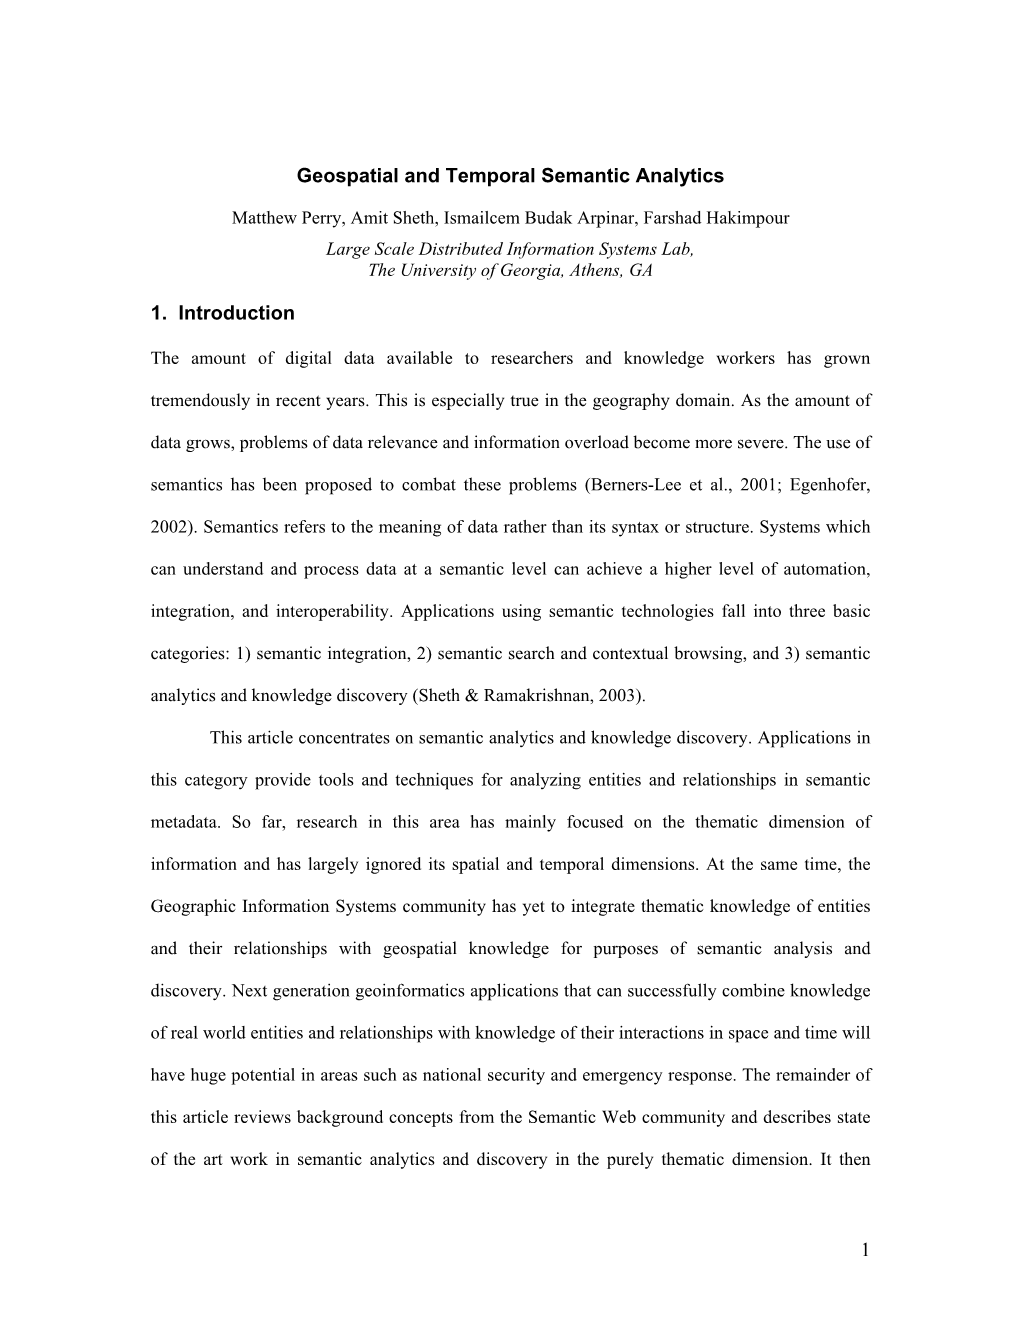 1 Geospatial and Temporal Semantic Analytics 1. Introduction